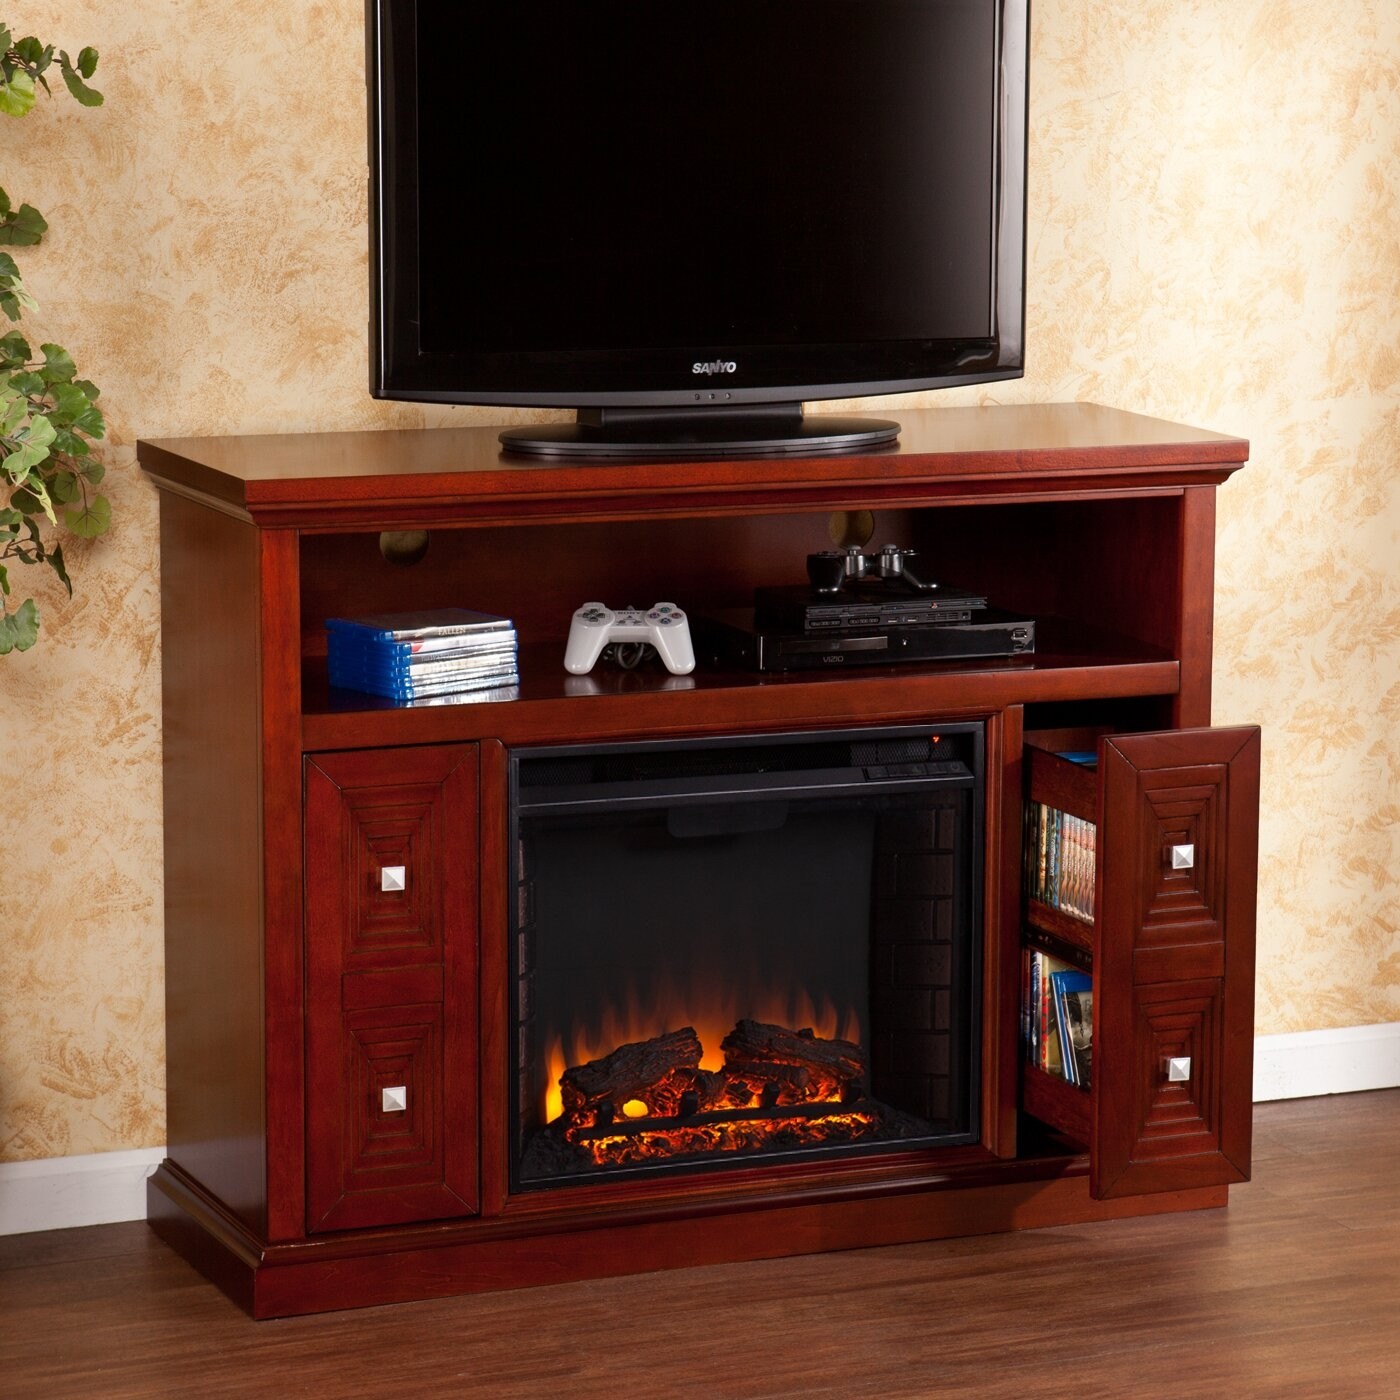 Faulkner 48" TV Stand with Electric Fireplace